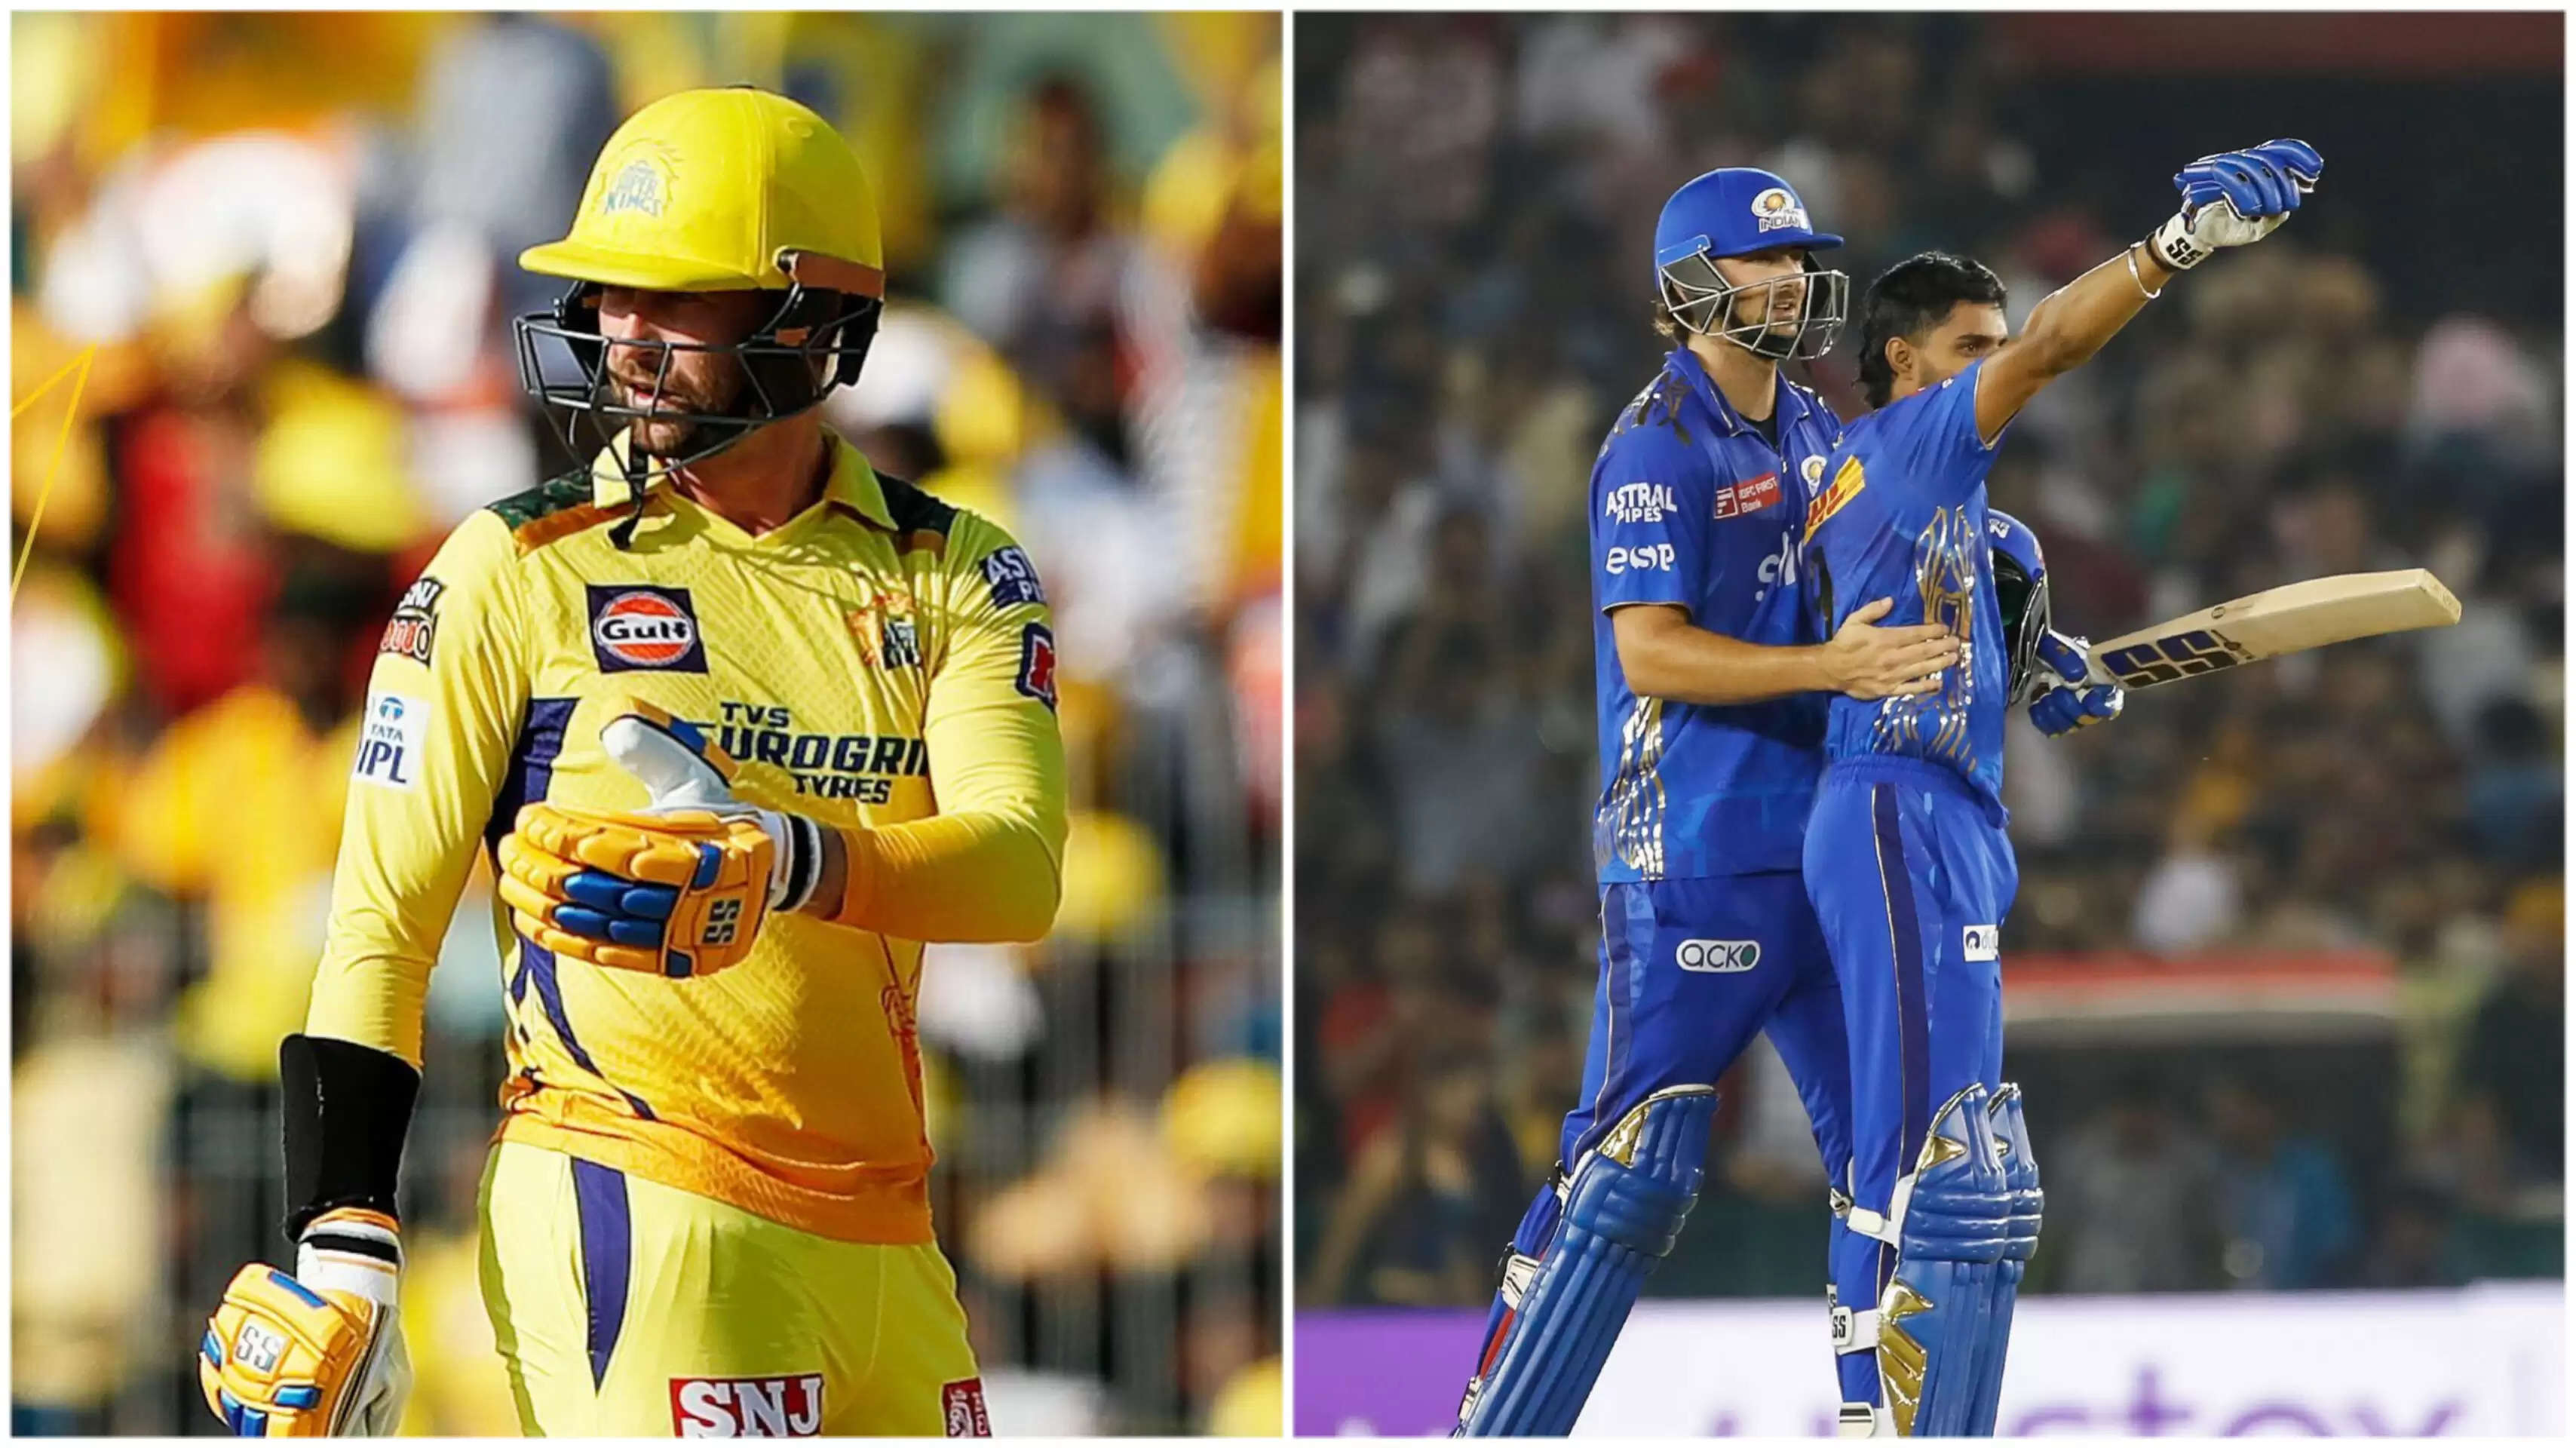 CSK are on 11 points after 10 matches while MI have 10 points from nine games.